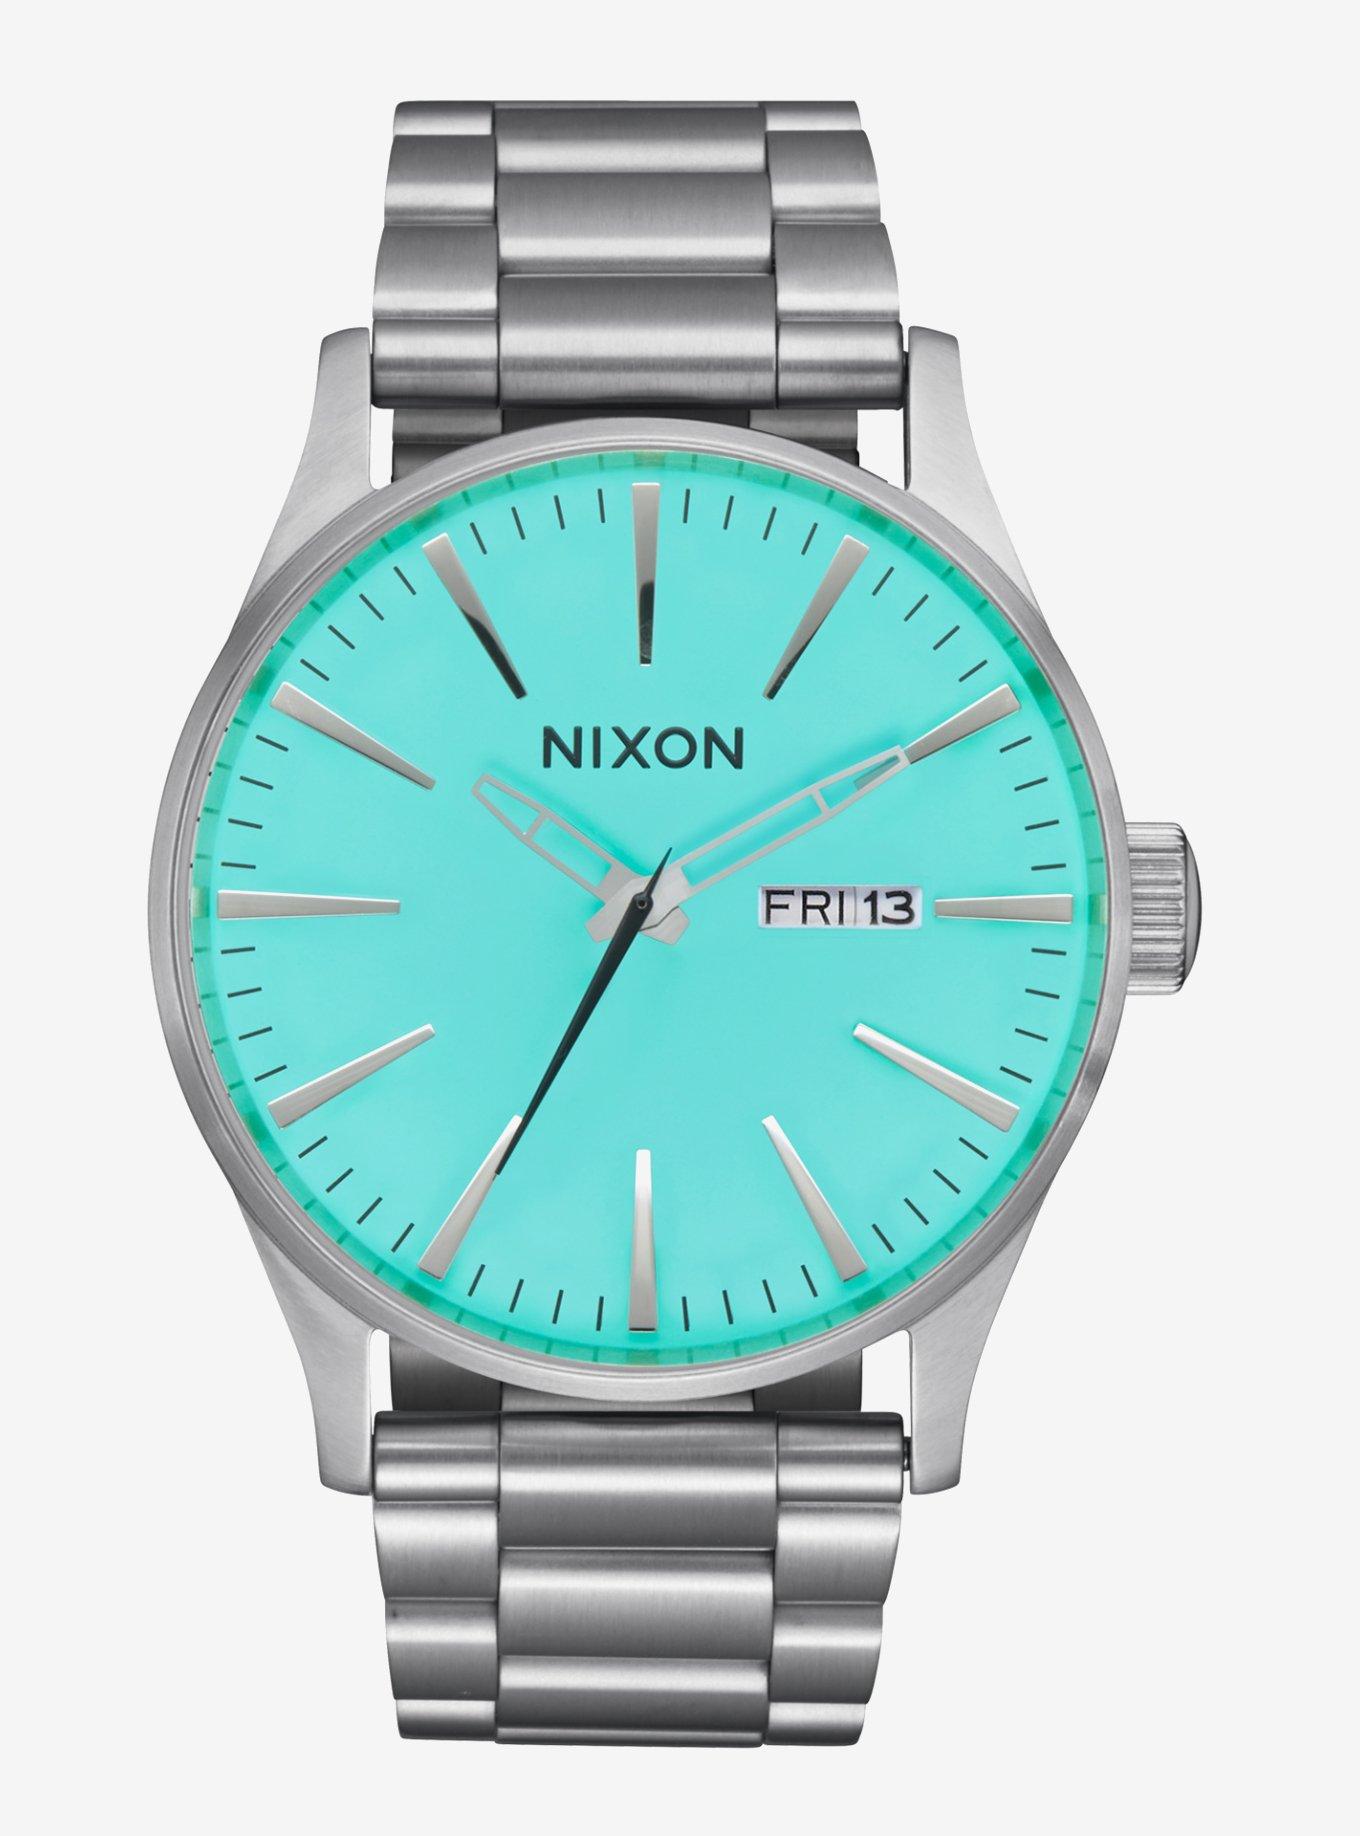 Nixon Sentry Stainless Steel Silver x Turquoise Watch